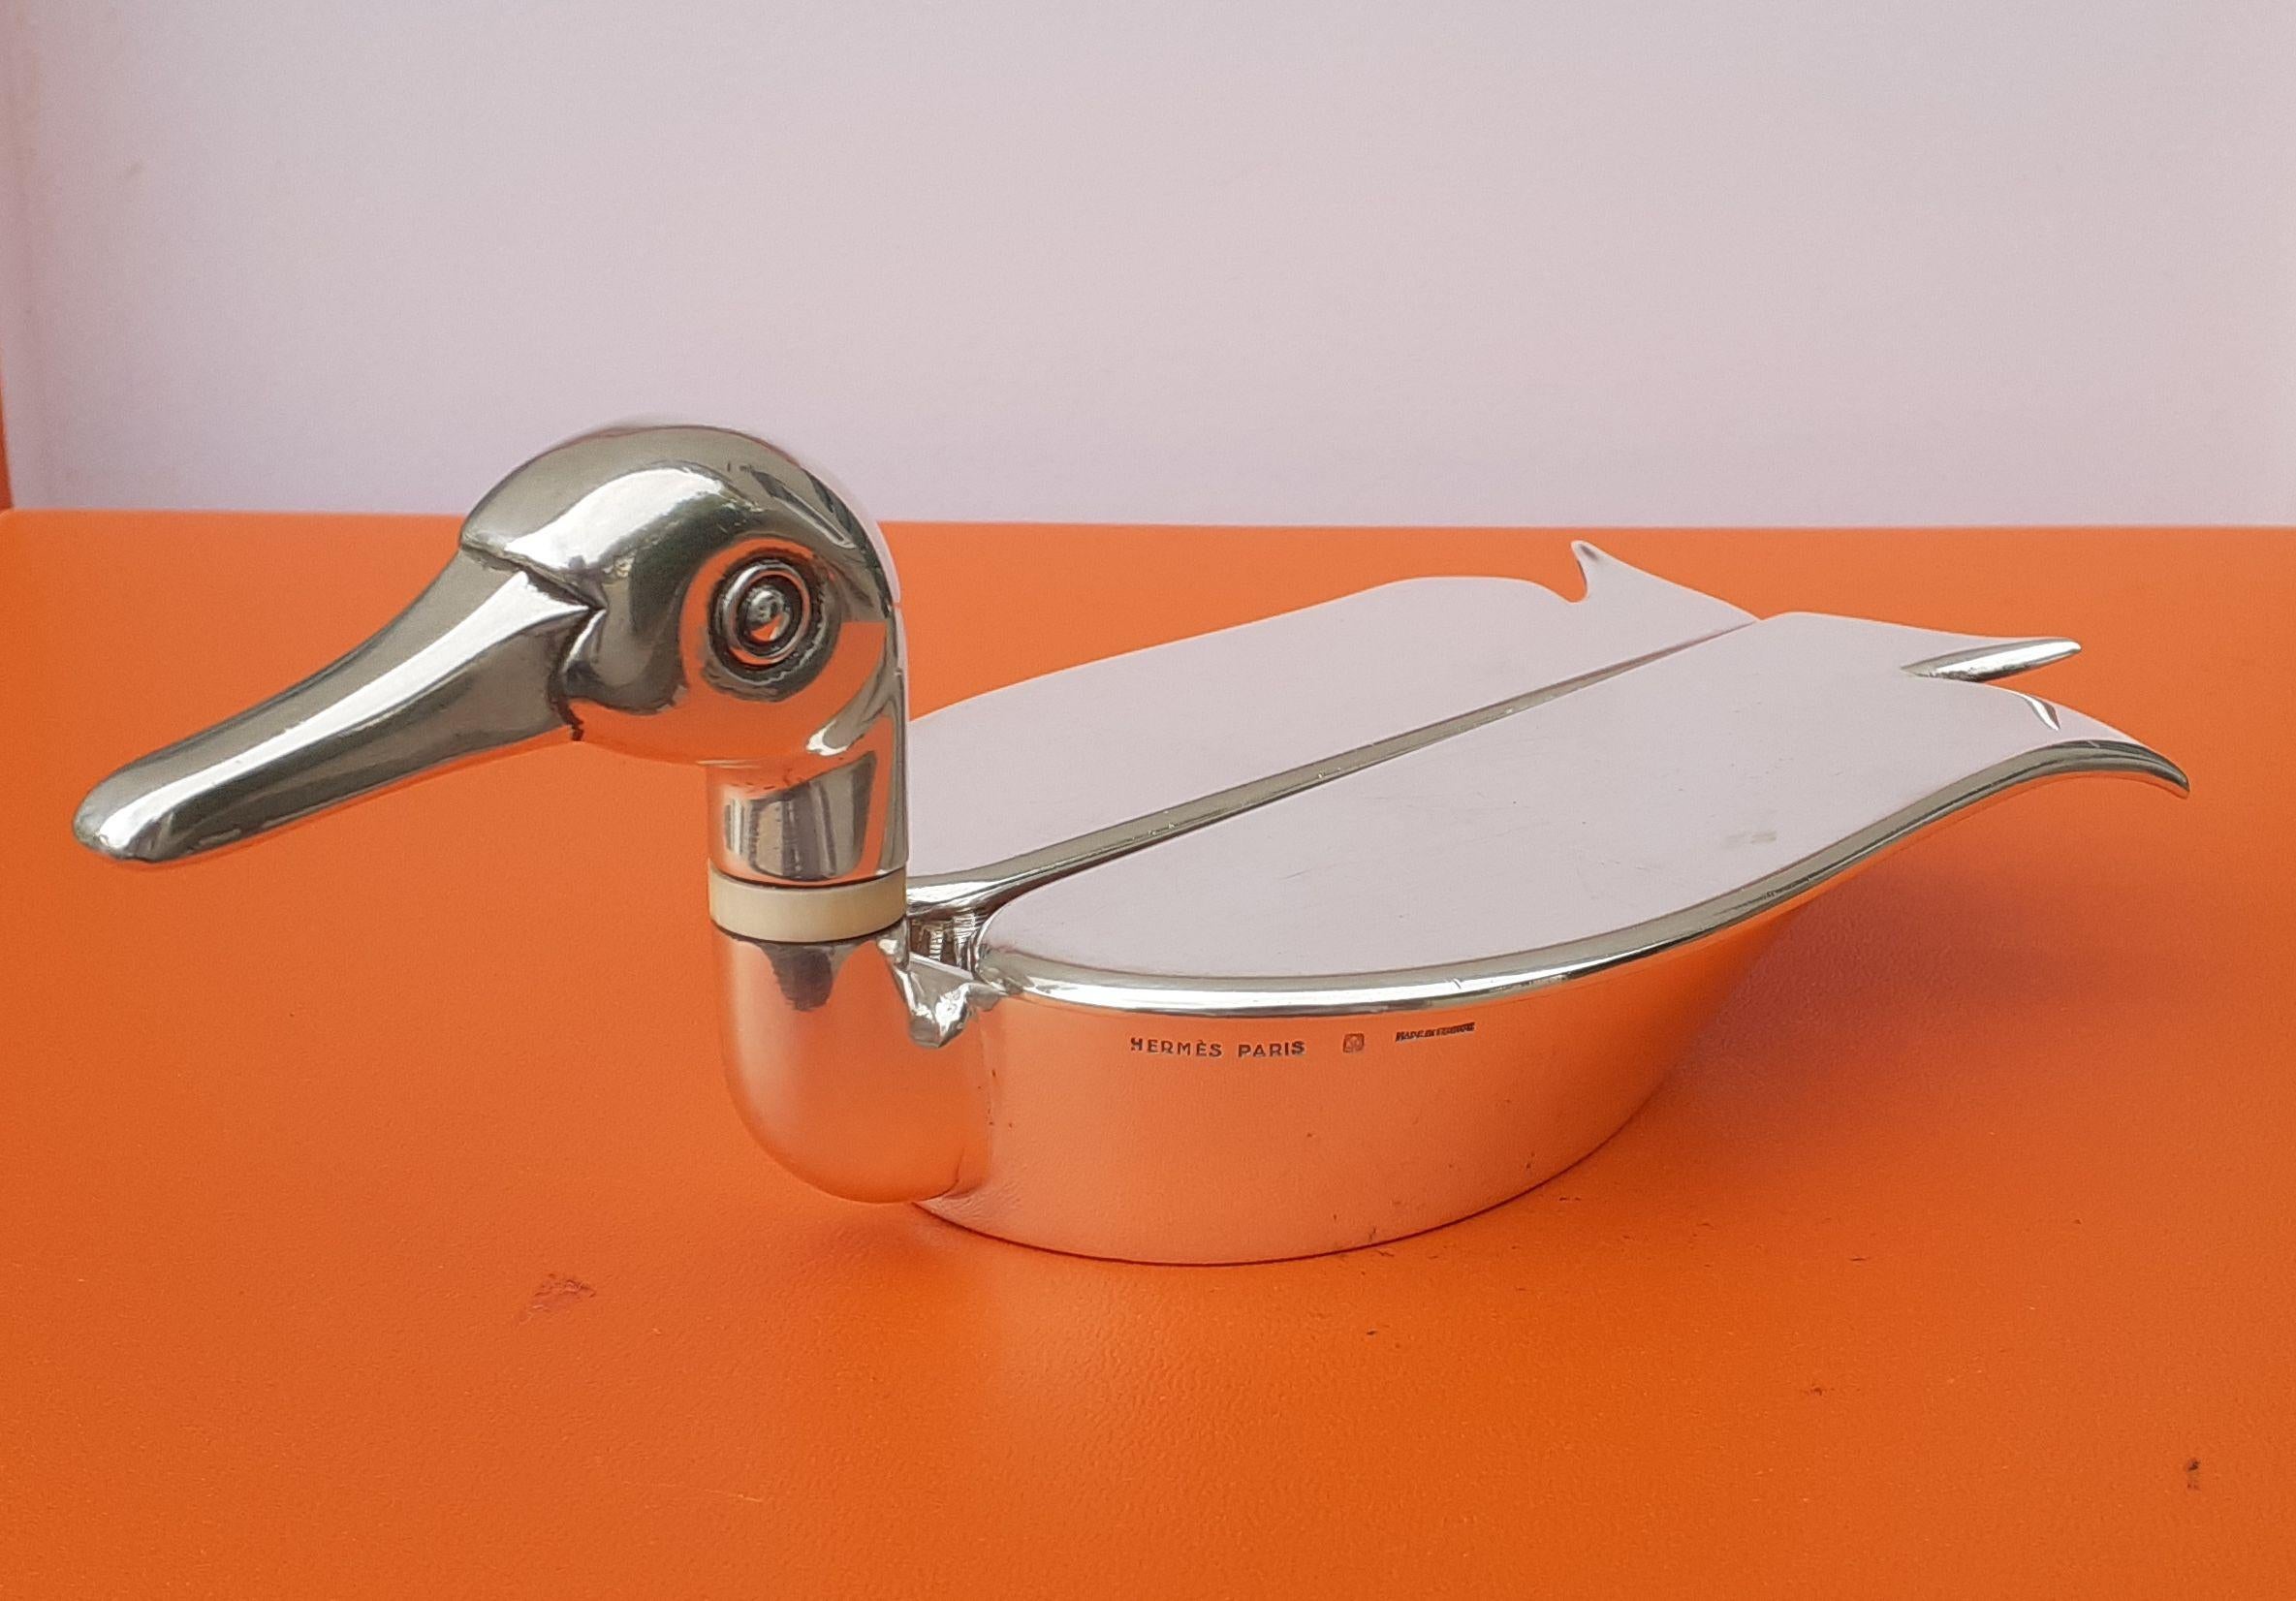 Exceptional Hermès Vintage Ashtray Change Tray Duck Shaped in Silver Tone Metal 14